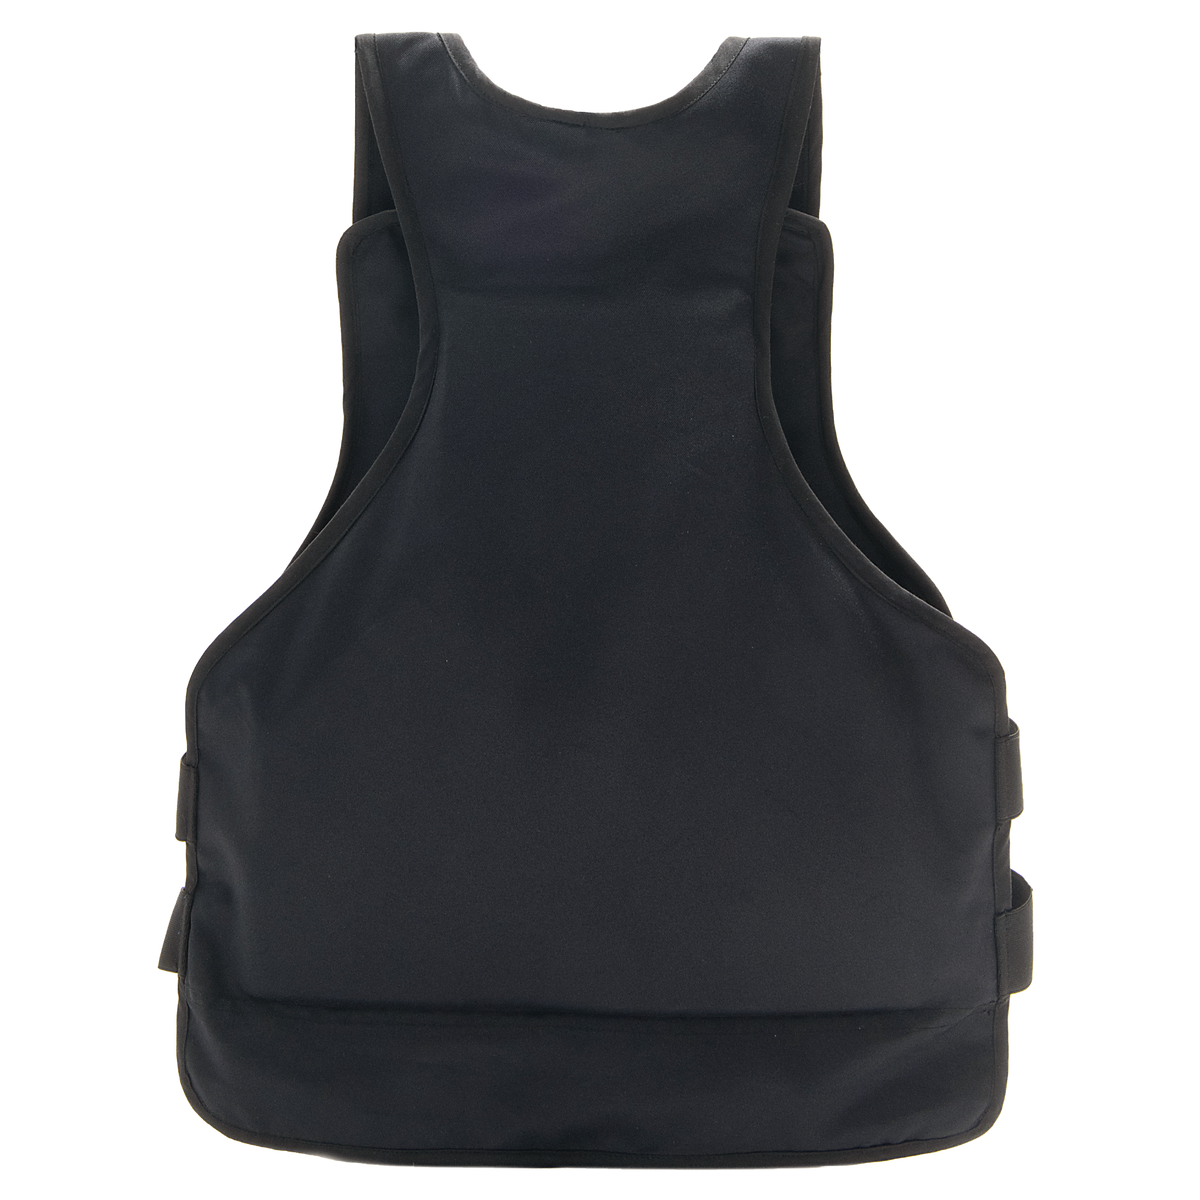 GBVI-2 Concealable Vest – Gear Industries